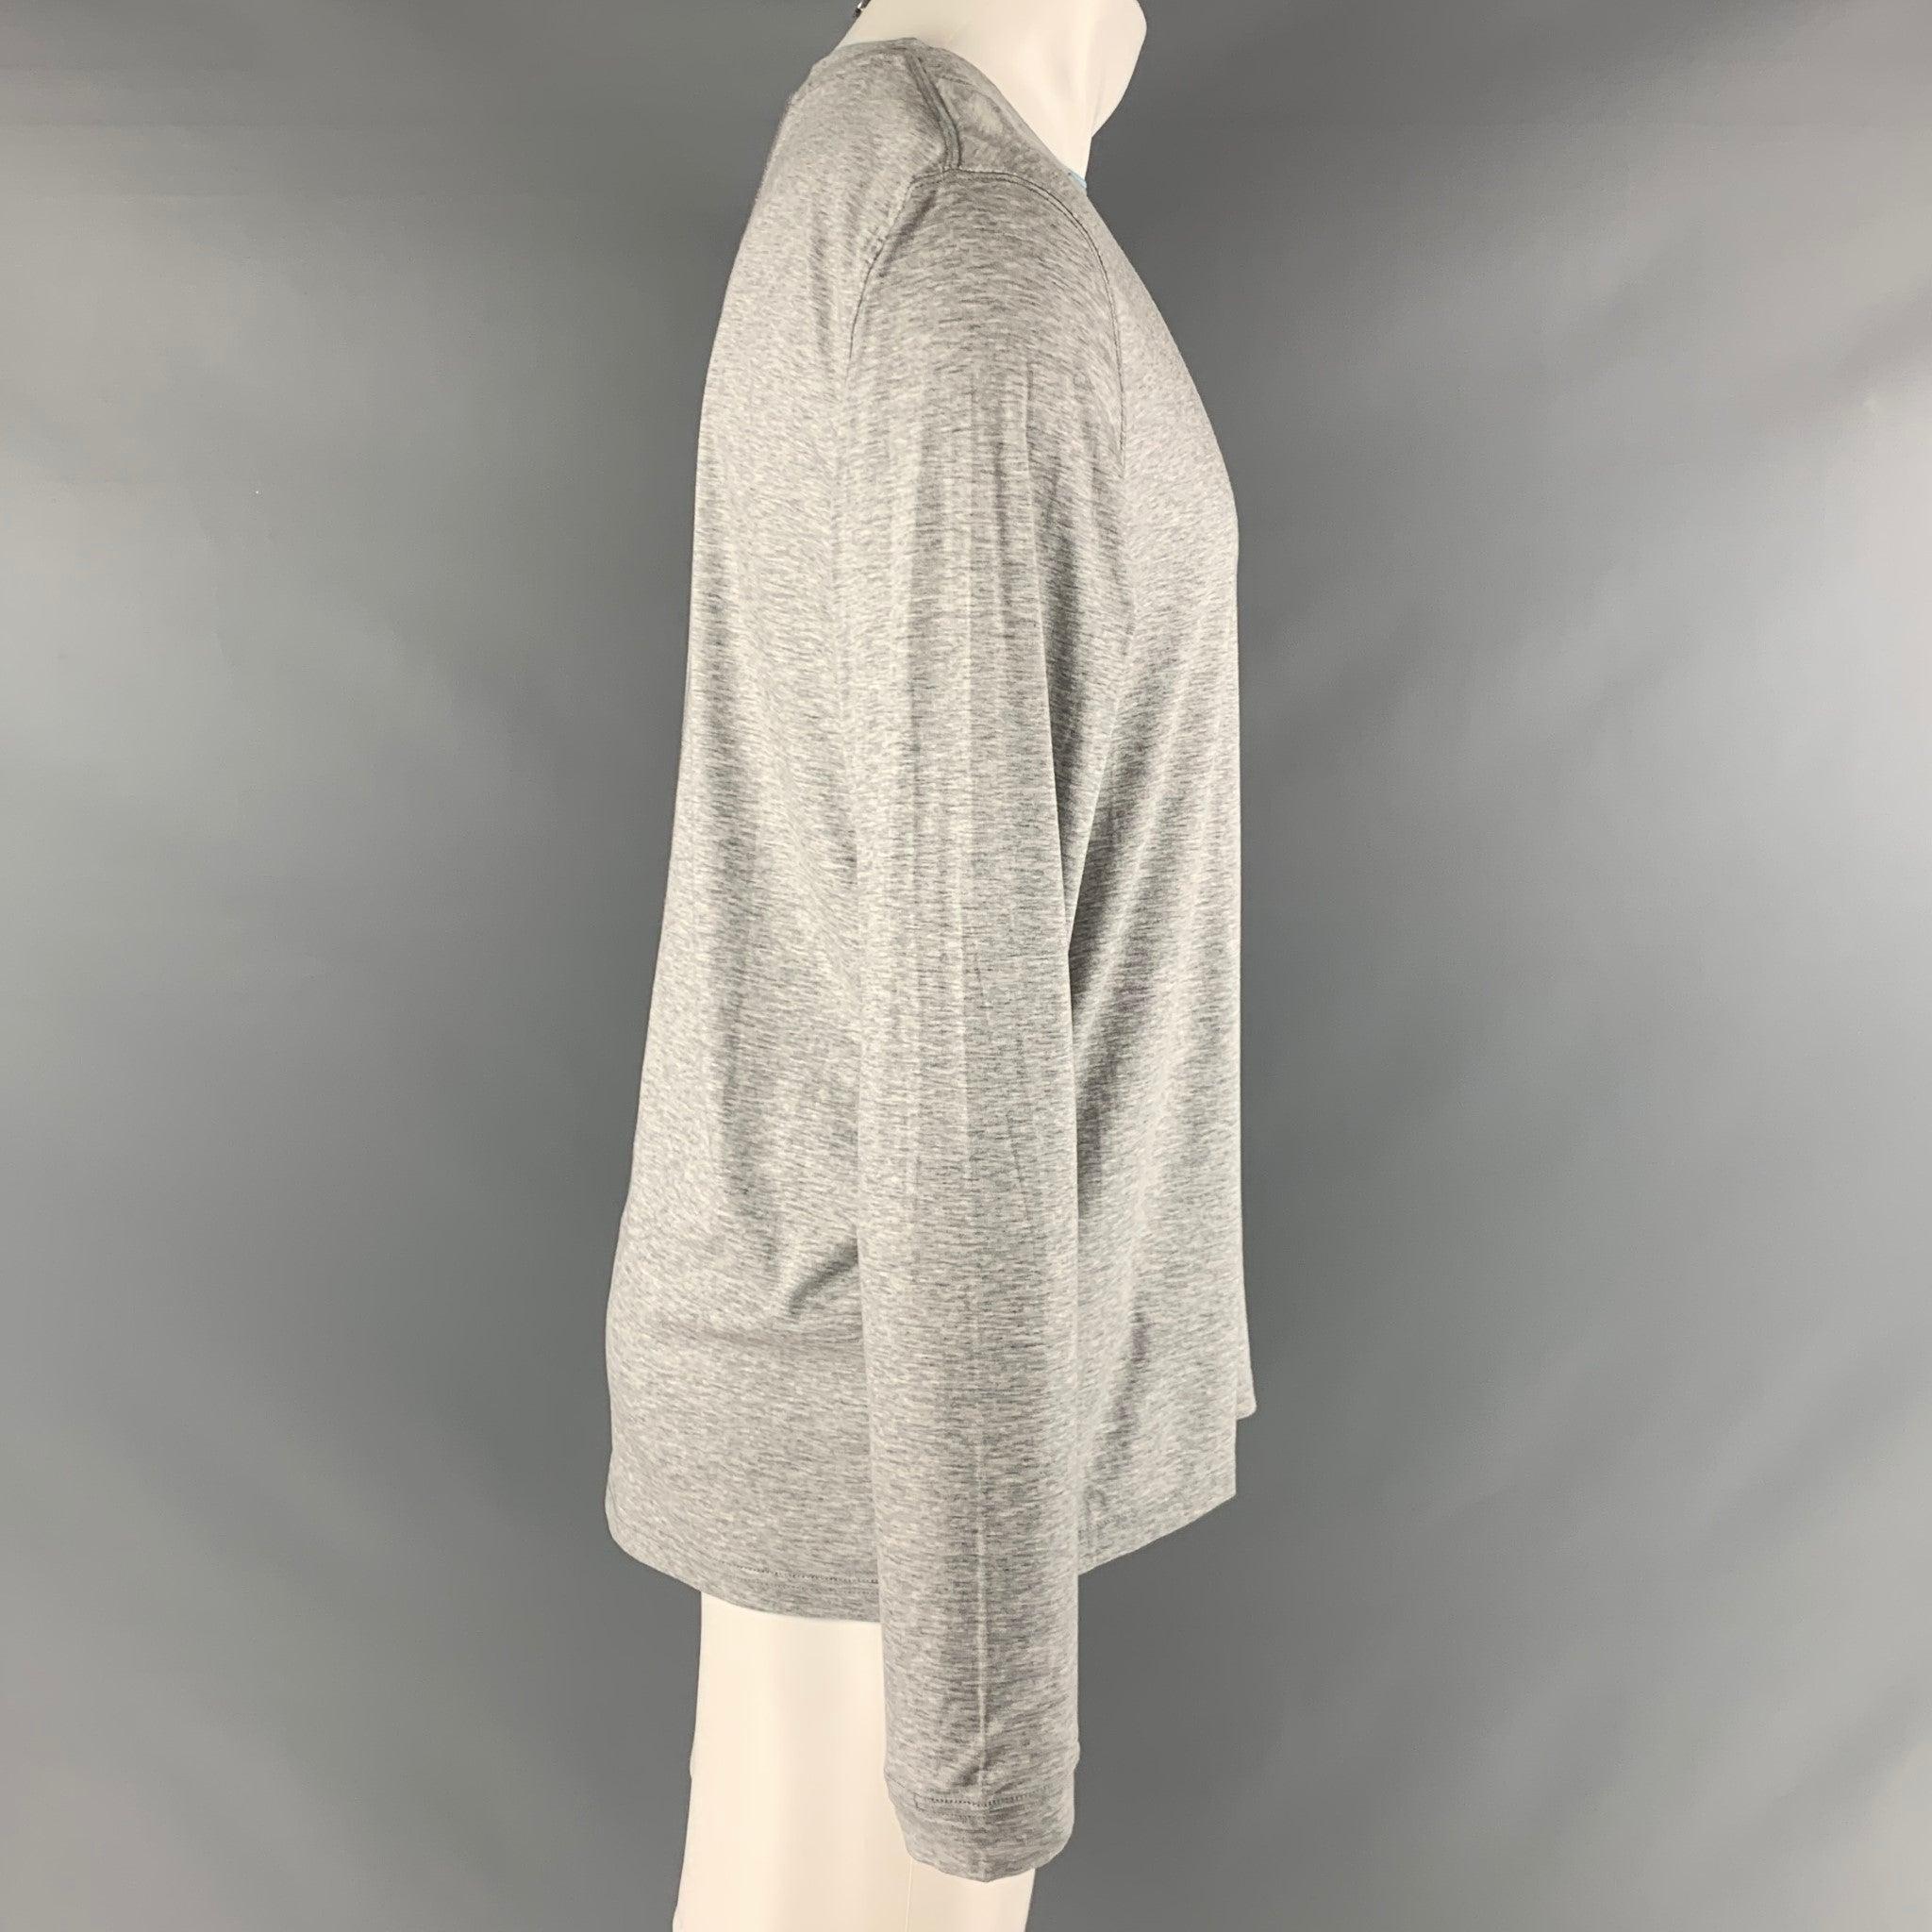 SAKS FIFTH AVENUE long sleeve t-shirt comes in a grey heather cotton and lyocell knit material featuring a blue layered crew-neck. Excellent Pre-Owned Condition. 

Marked:   M 

Measurements: 
 
Shoulder: 18 inches Chest: 38 inches Sleeve: 26 inches